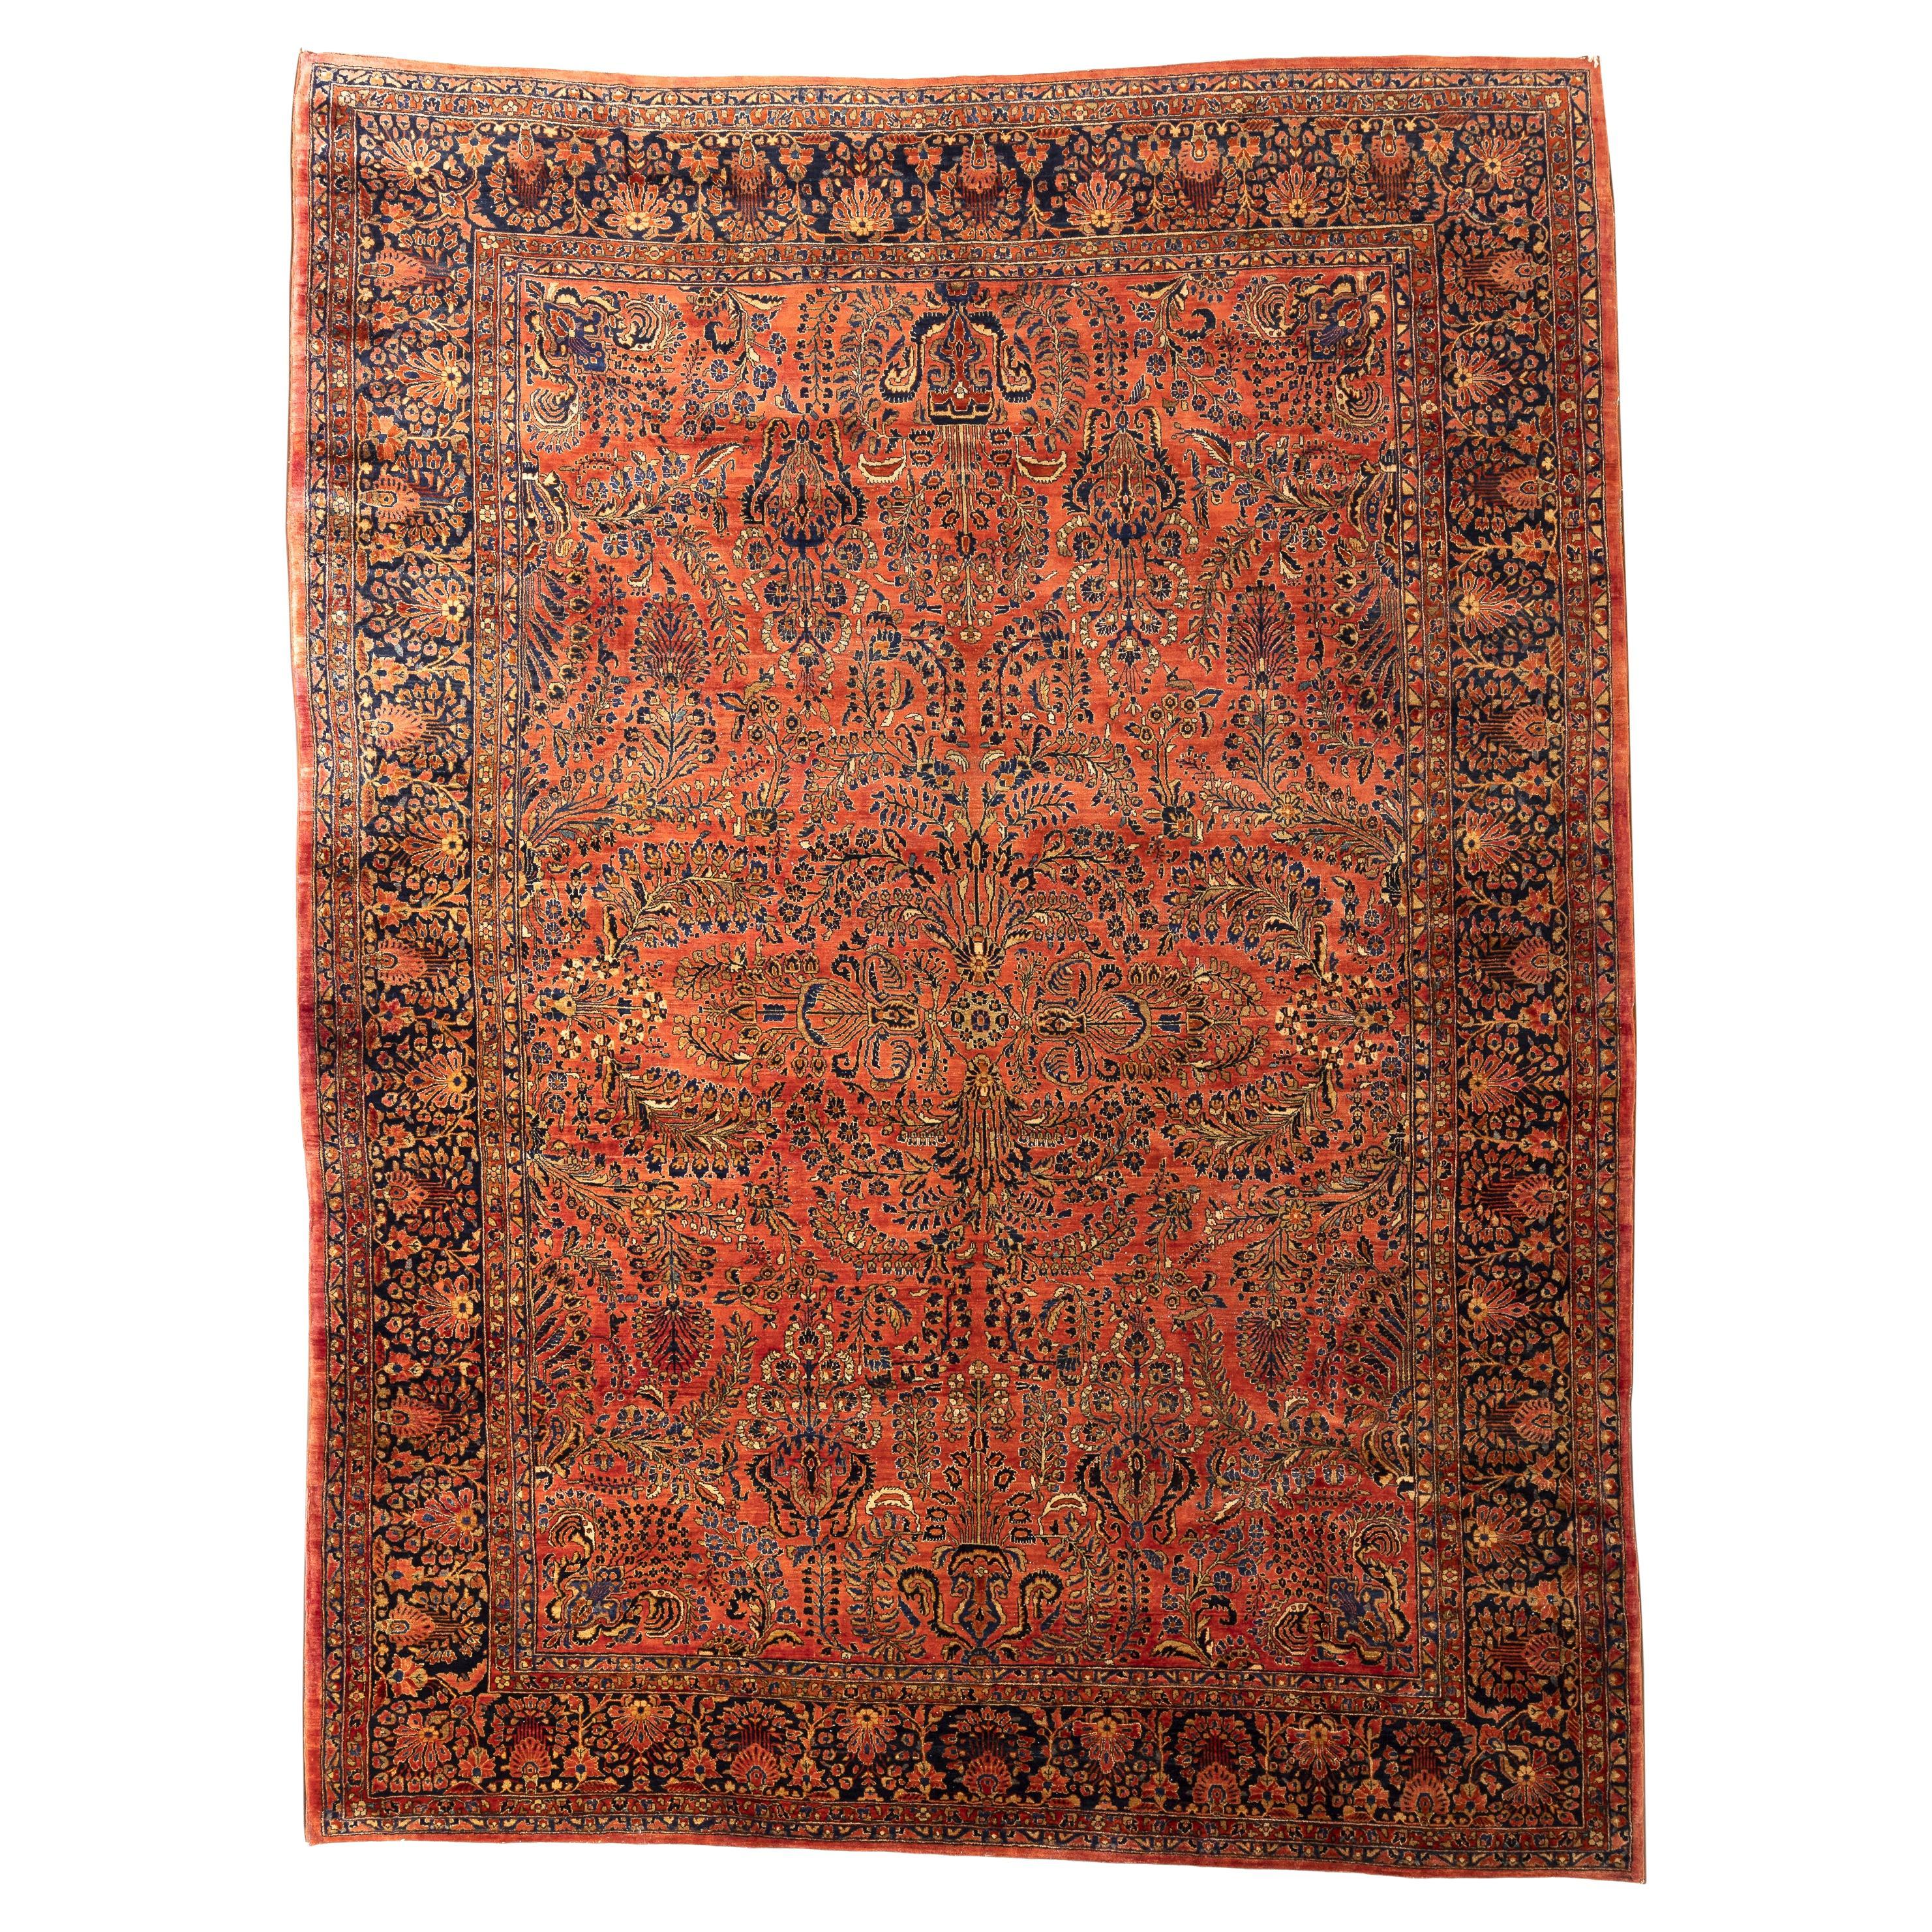 Lilihan Sarouk – West Persia

Magnificent antique Lilihan Sarouk rug with bright and vivid colours. This piece is of excellent quality, made in the early 20th century in the south of Arak by Armenians living in Persia. With a rich floral design, the